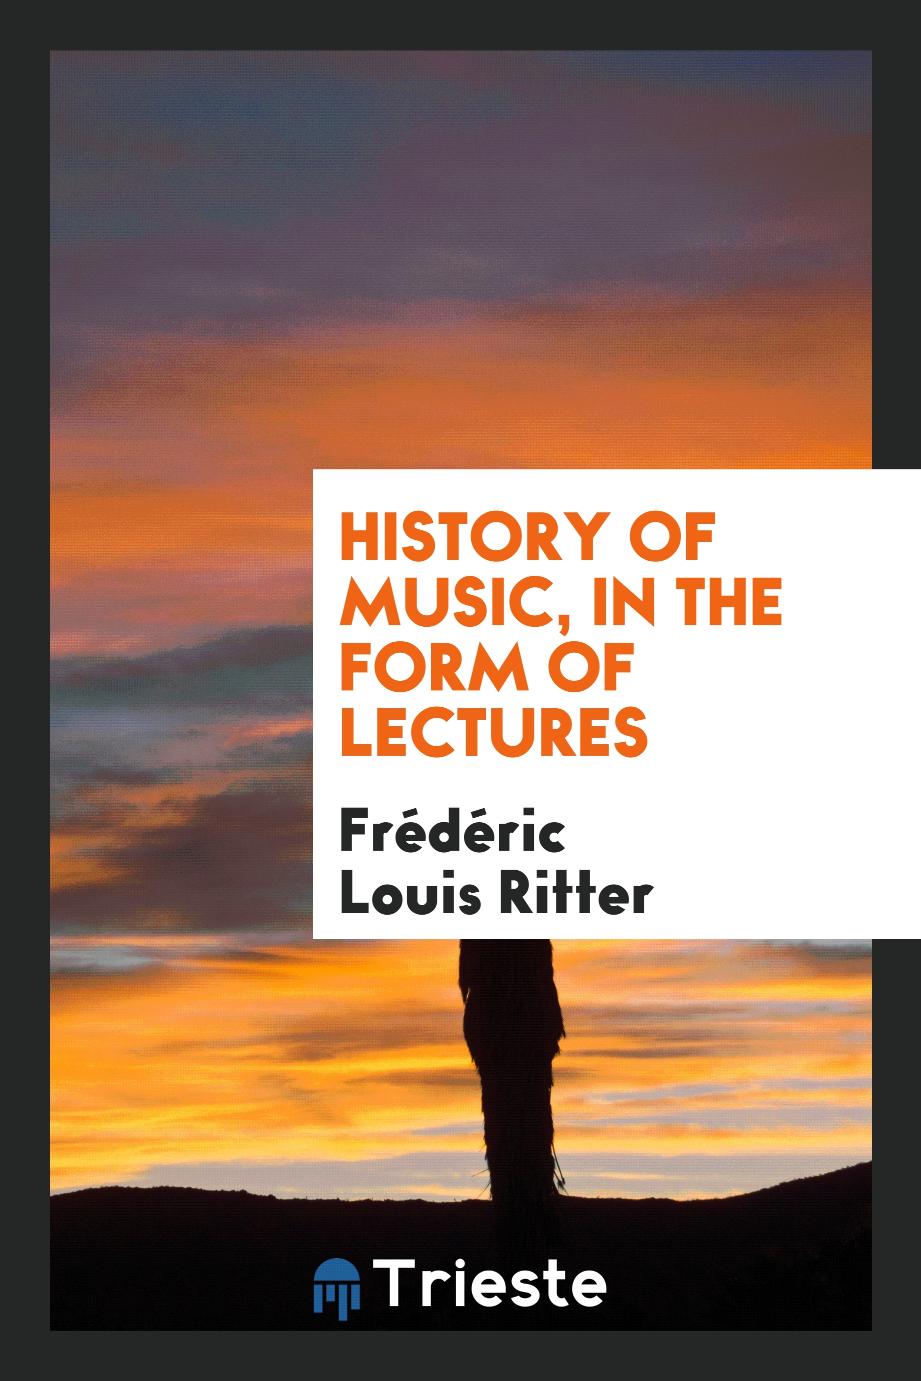 History of music, in the form of lectures